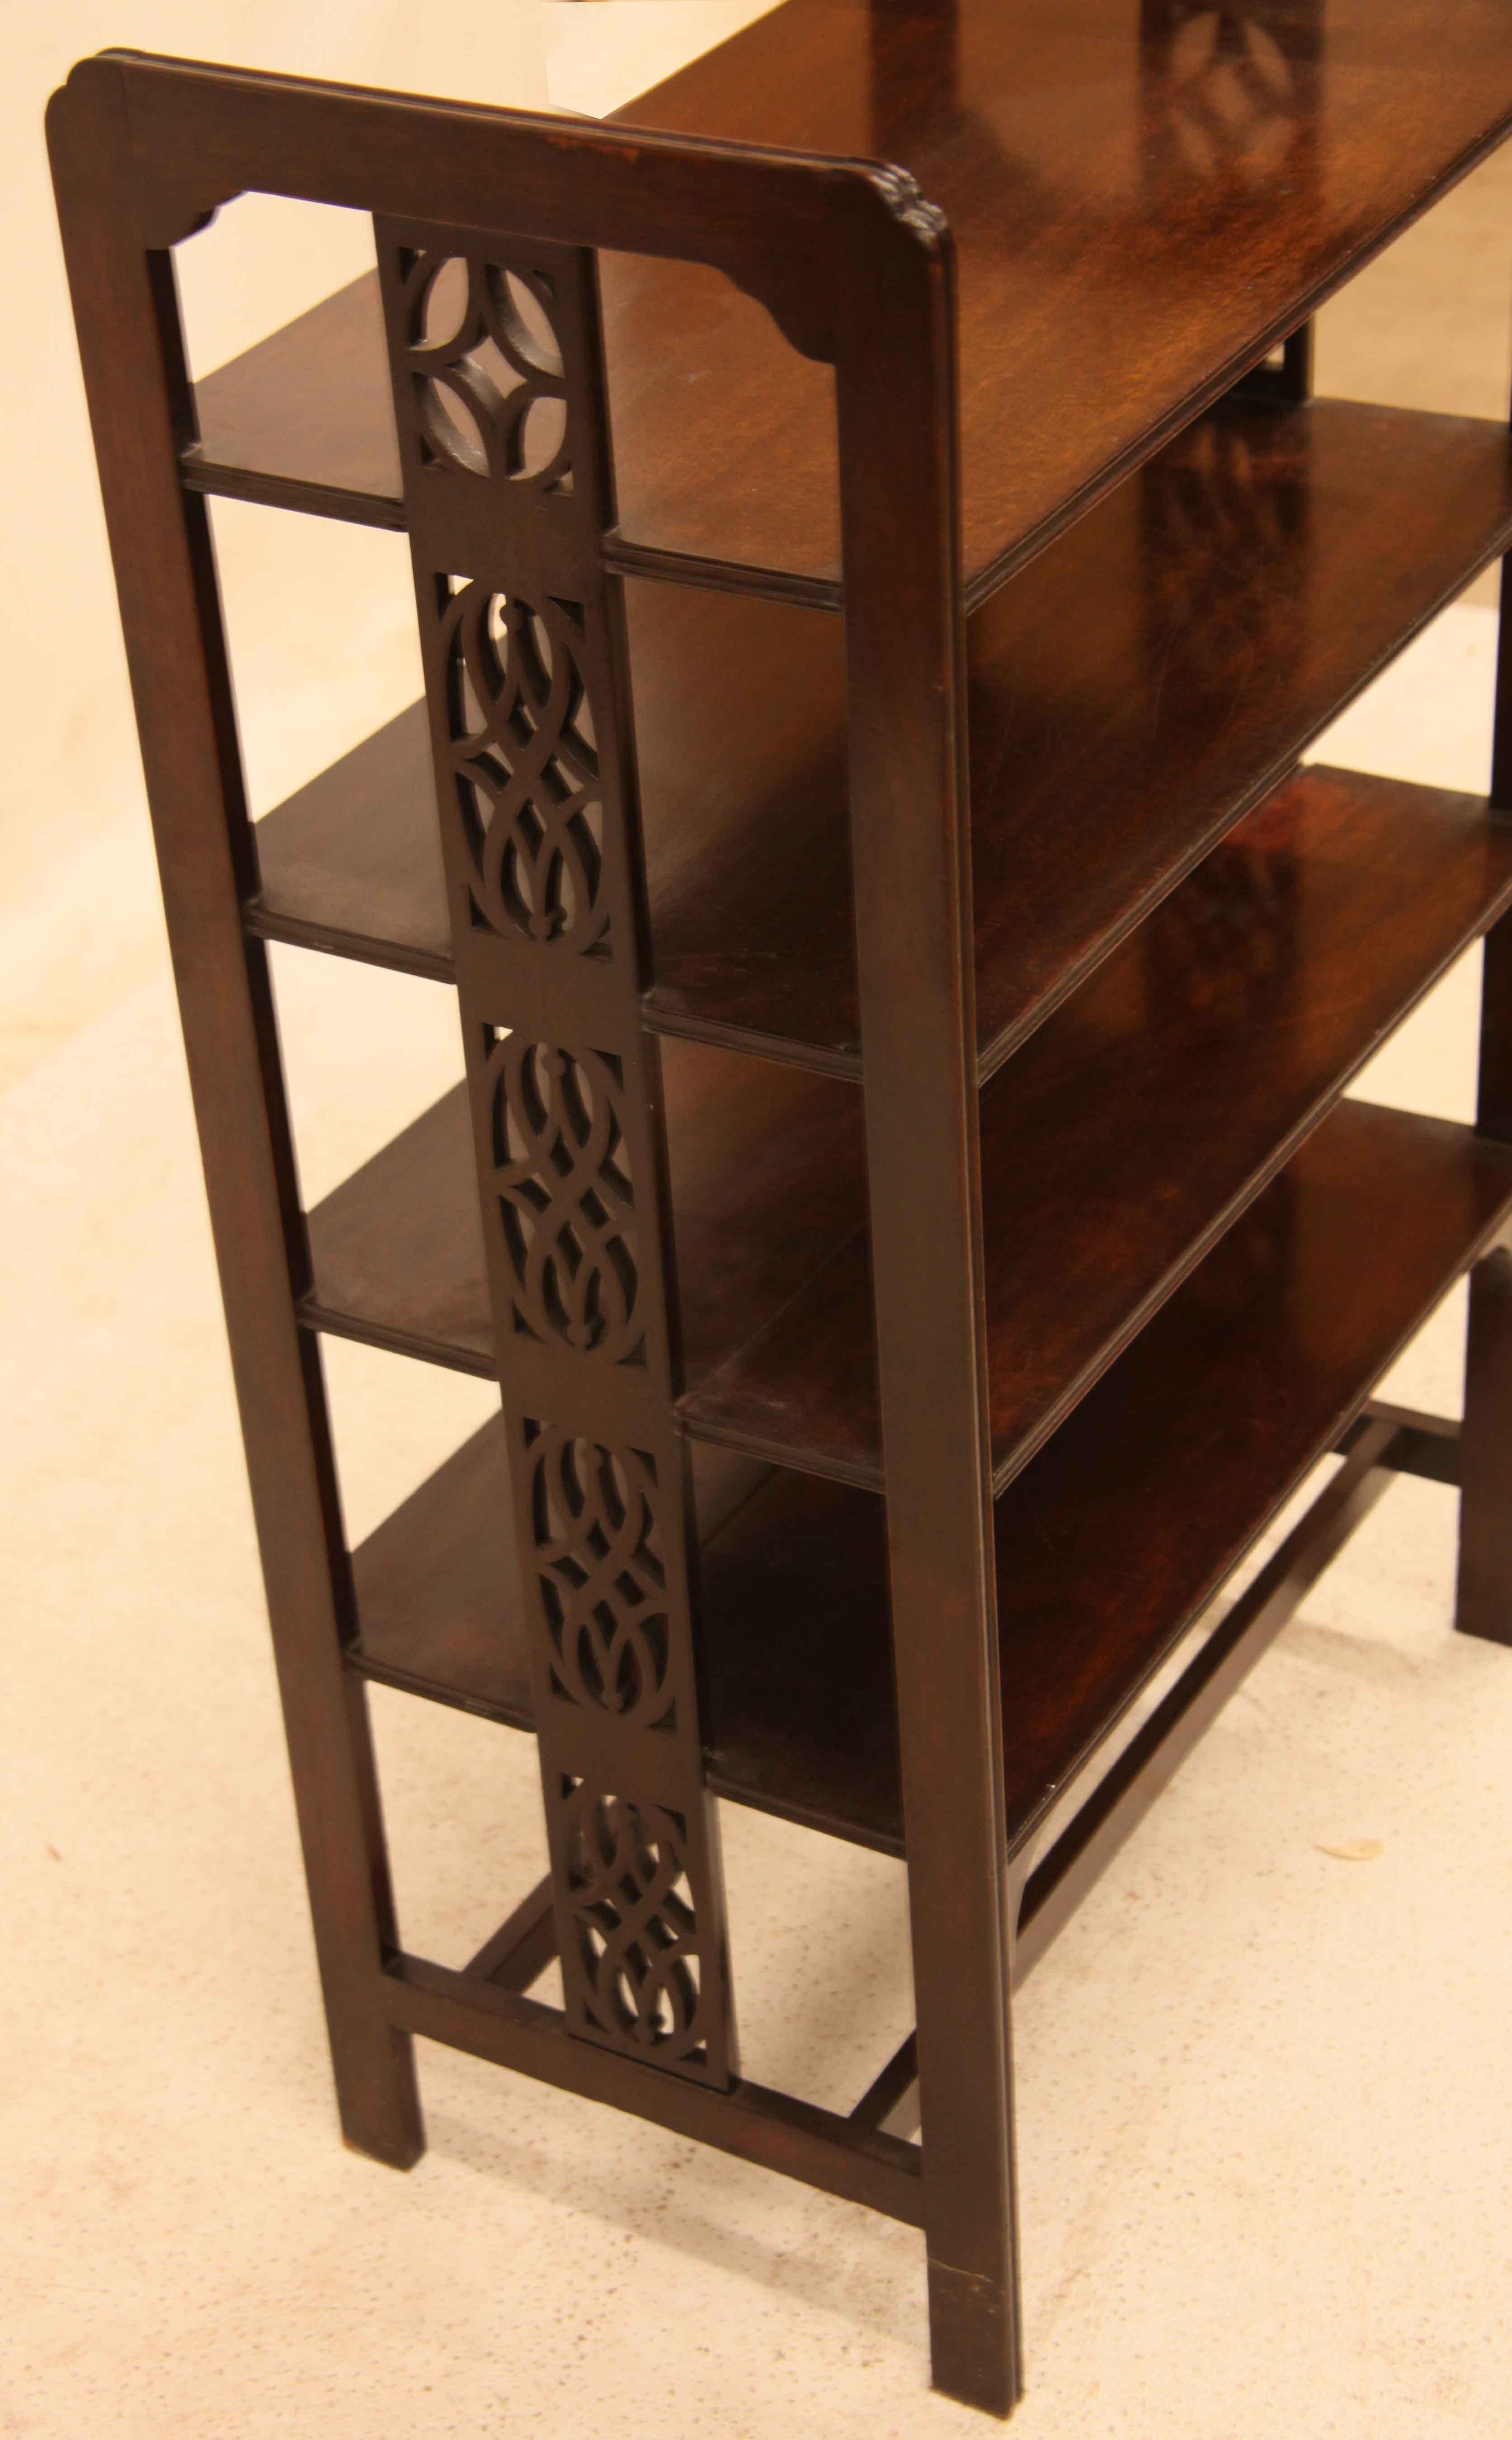 English mahogany magazine rack, this piece would be excellent for storing sheet music as well.  It has a rich brown mahogany color and patina.  The outstanding feature is the center of the ends with an open fretwork design that carries the entire